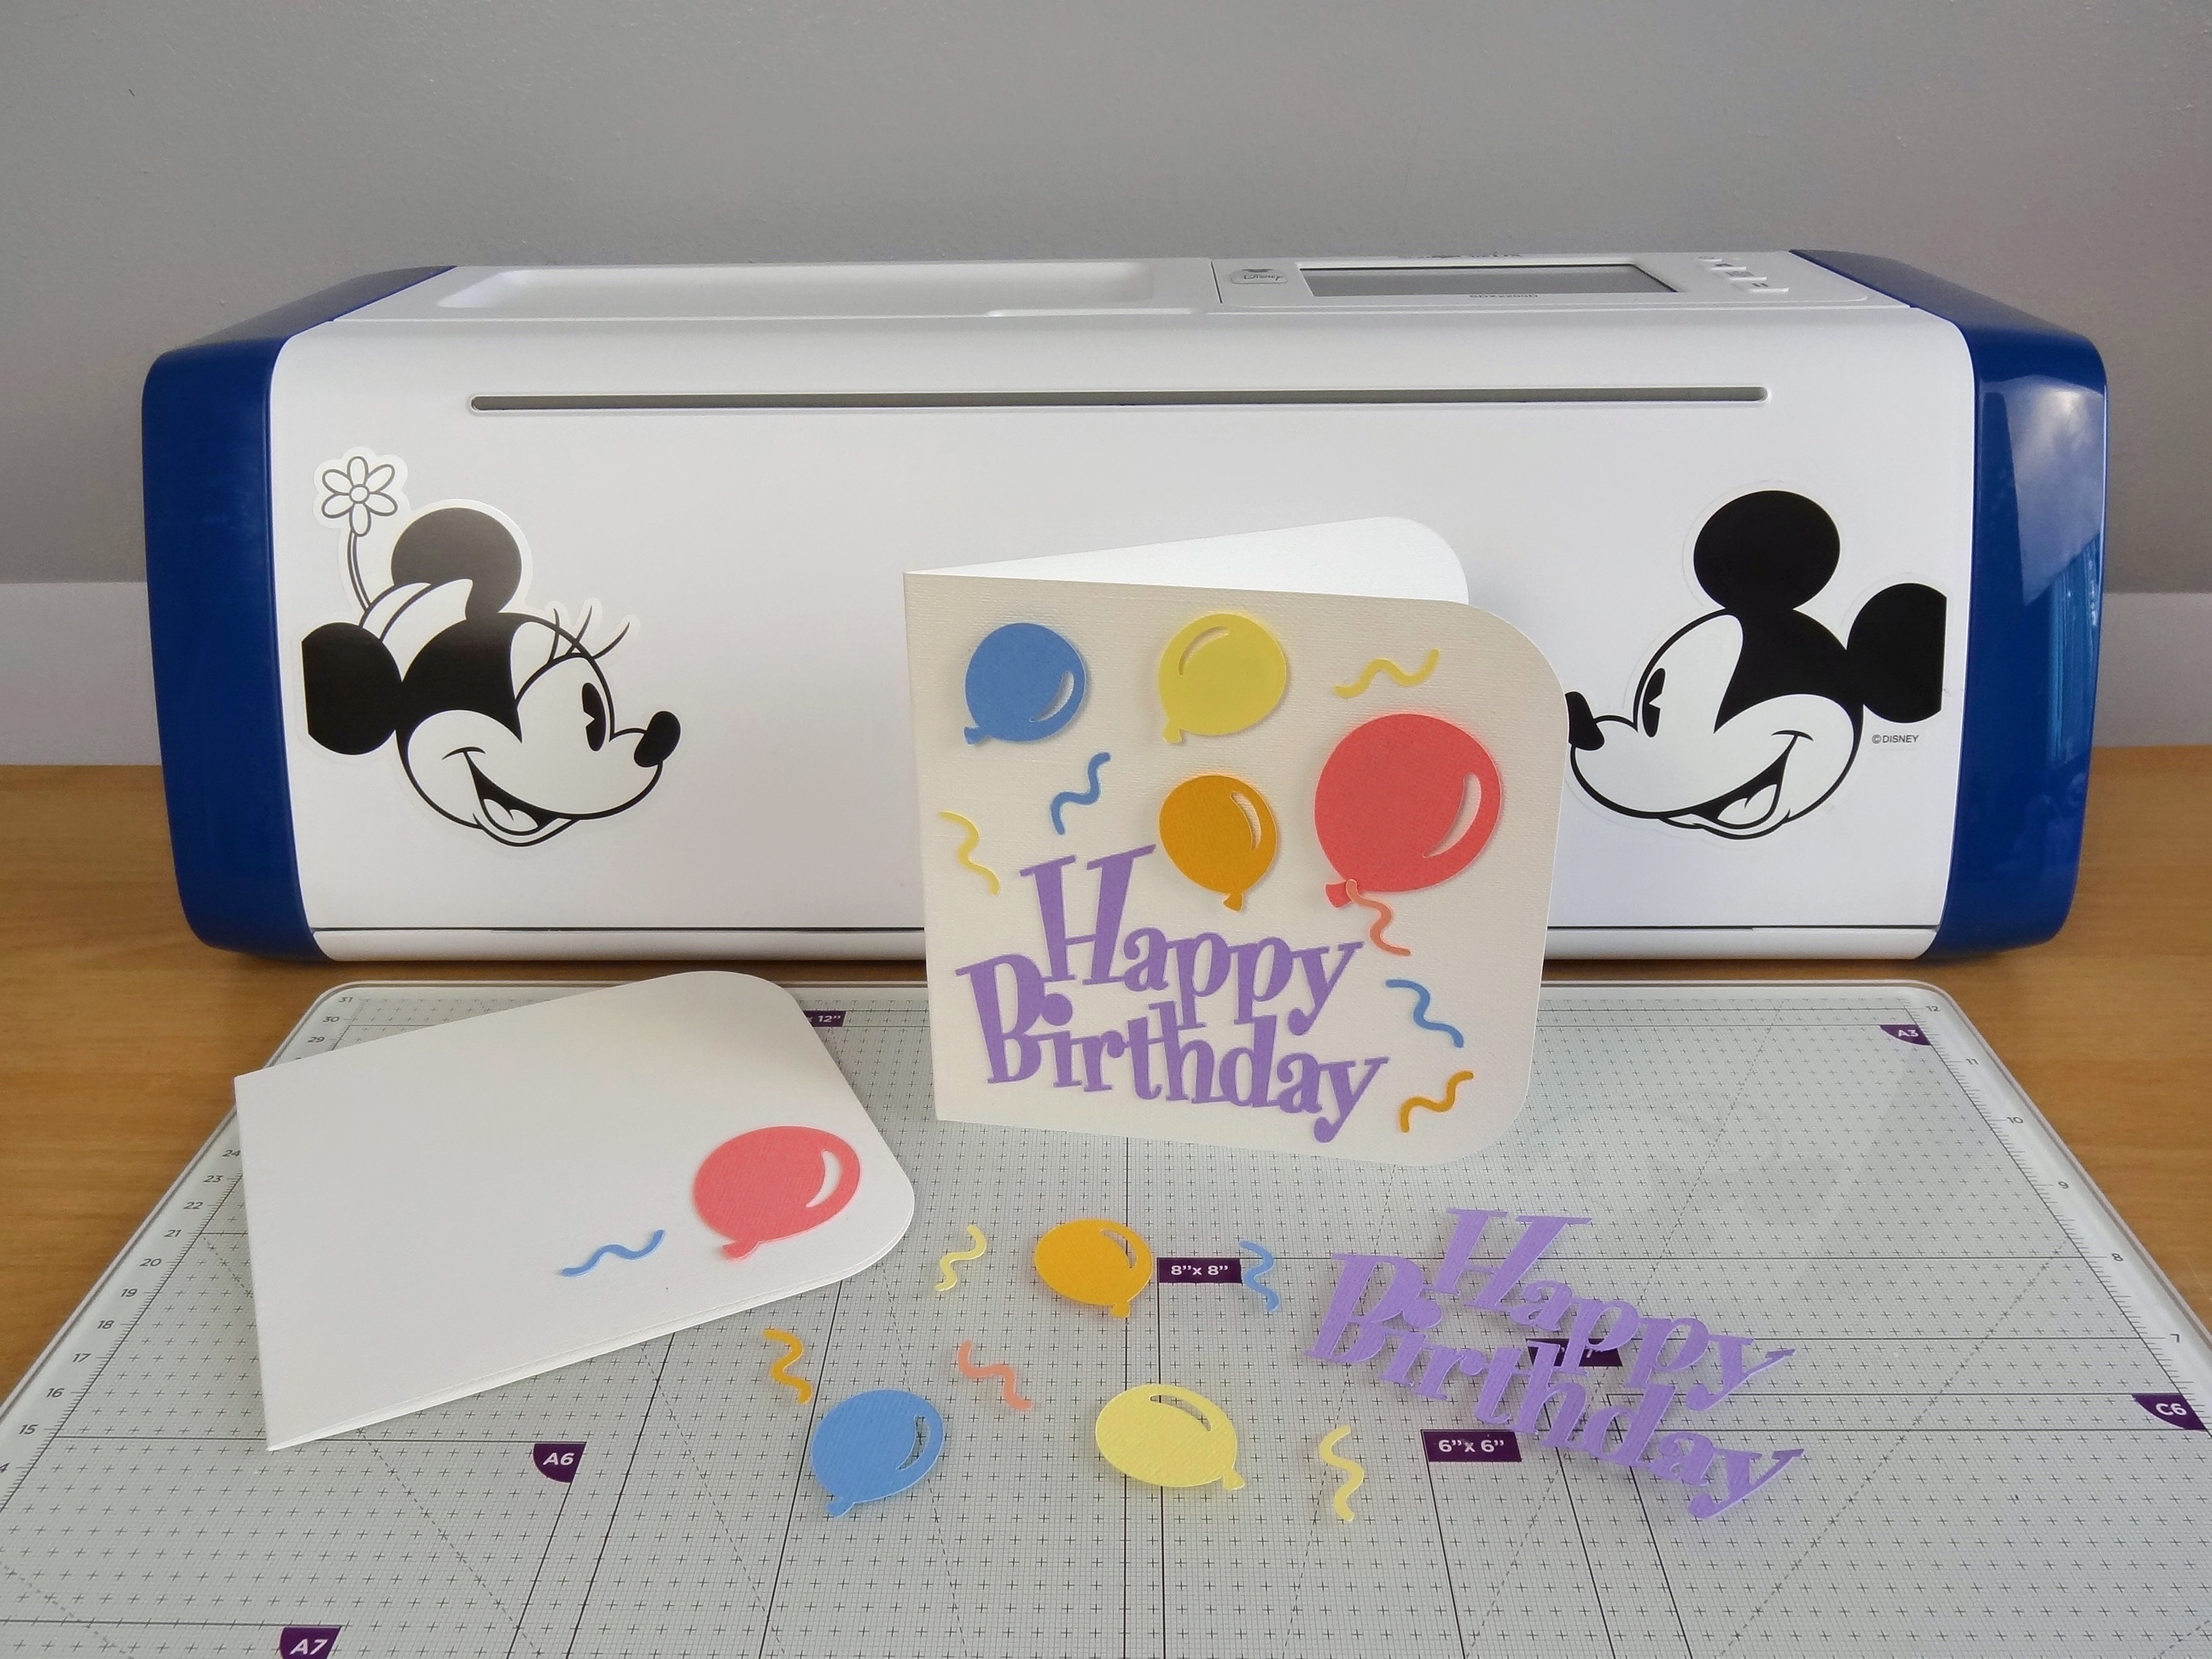 How to make a birthday card with the ScanNCut